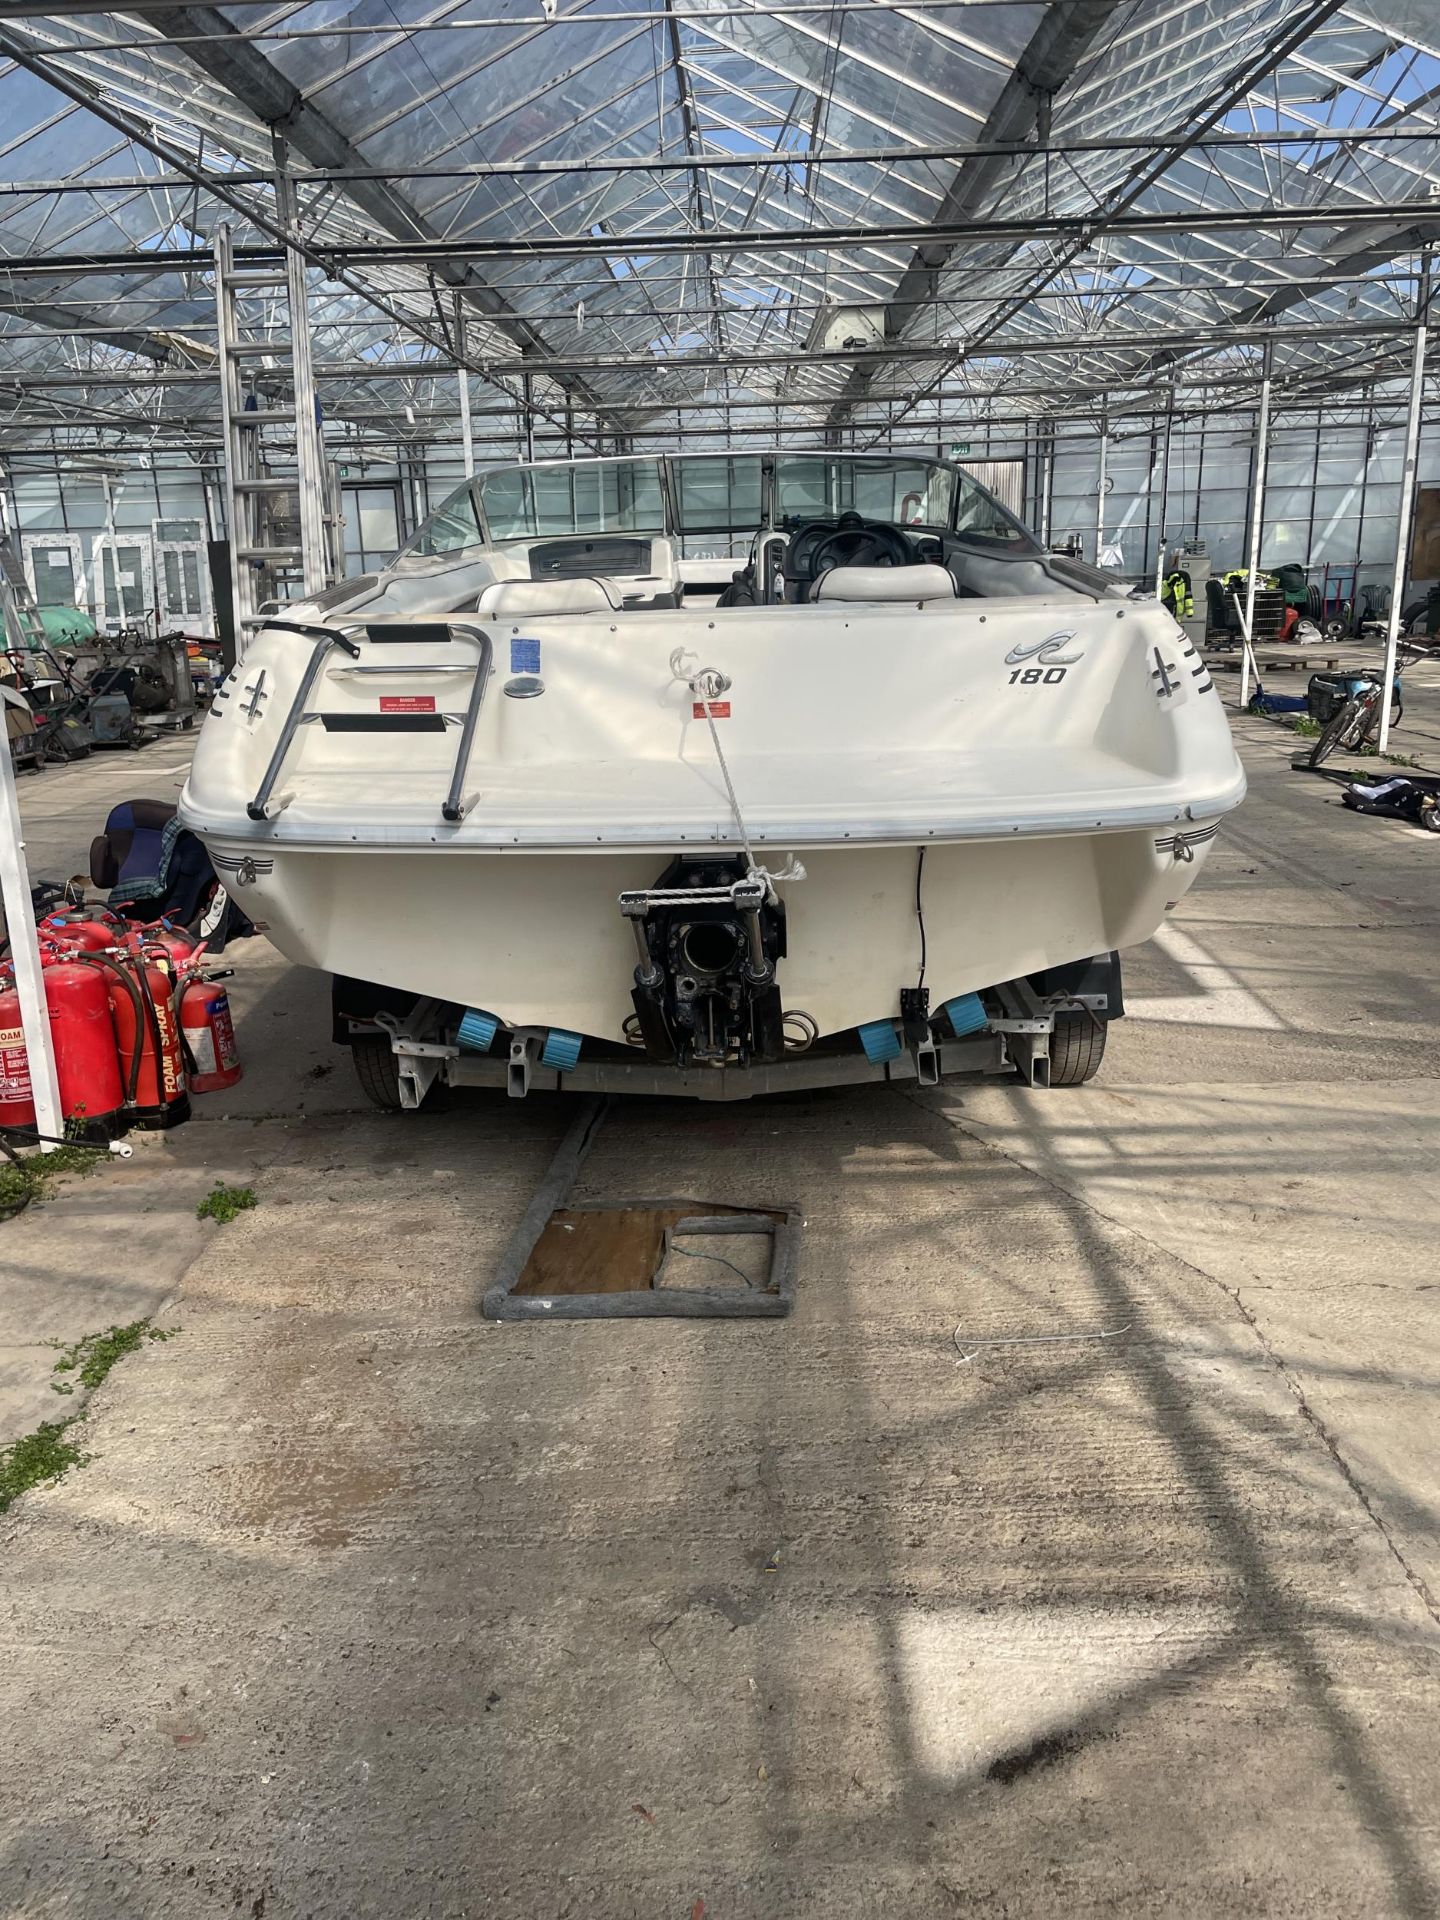 A SEARAY 180 BOWRIDER POWER BOAT - A RESTORATION PROJECT, THE BOAT HAS BEEN DRY STORED, REQUIRES - Image 4 of 16